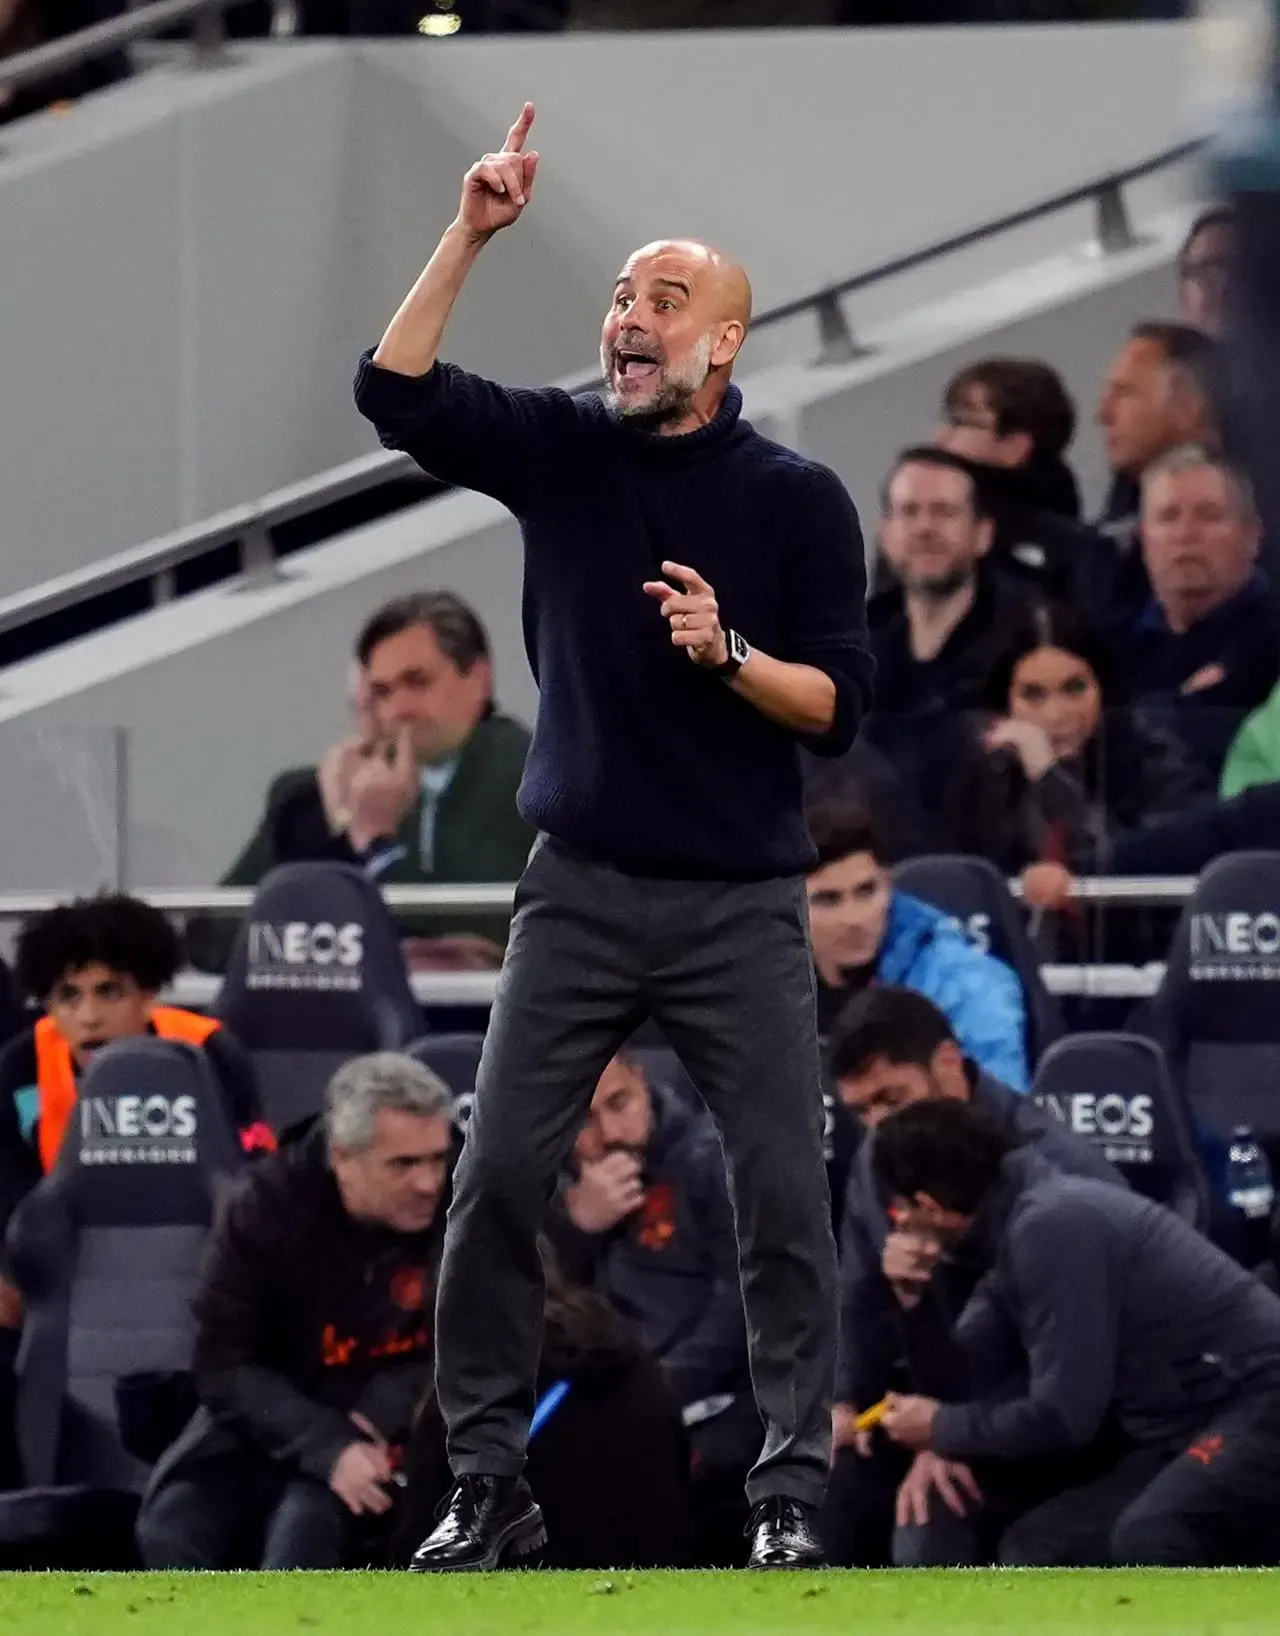 Pep Guardiola shouts instructions to Manchester City